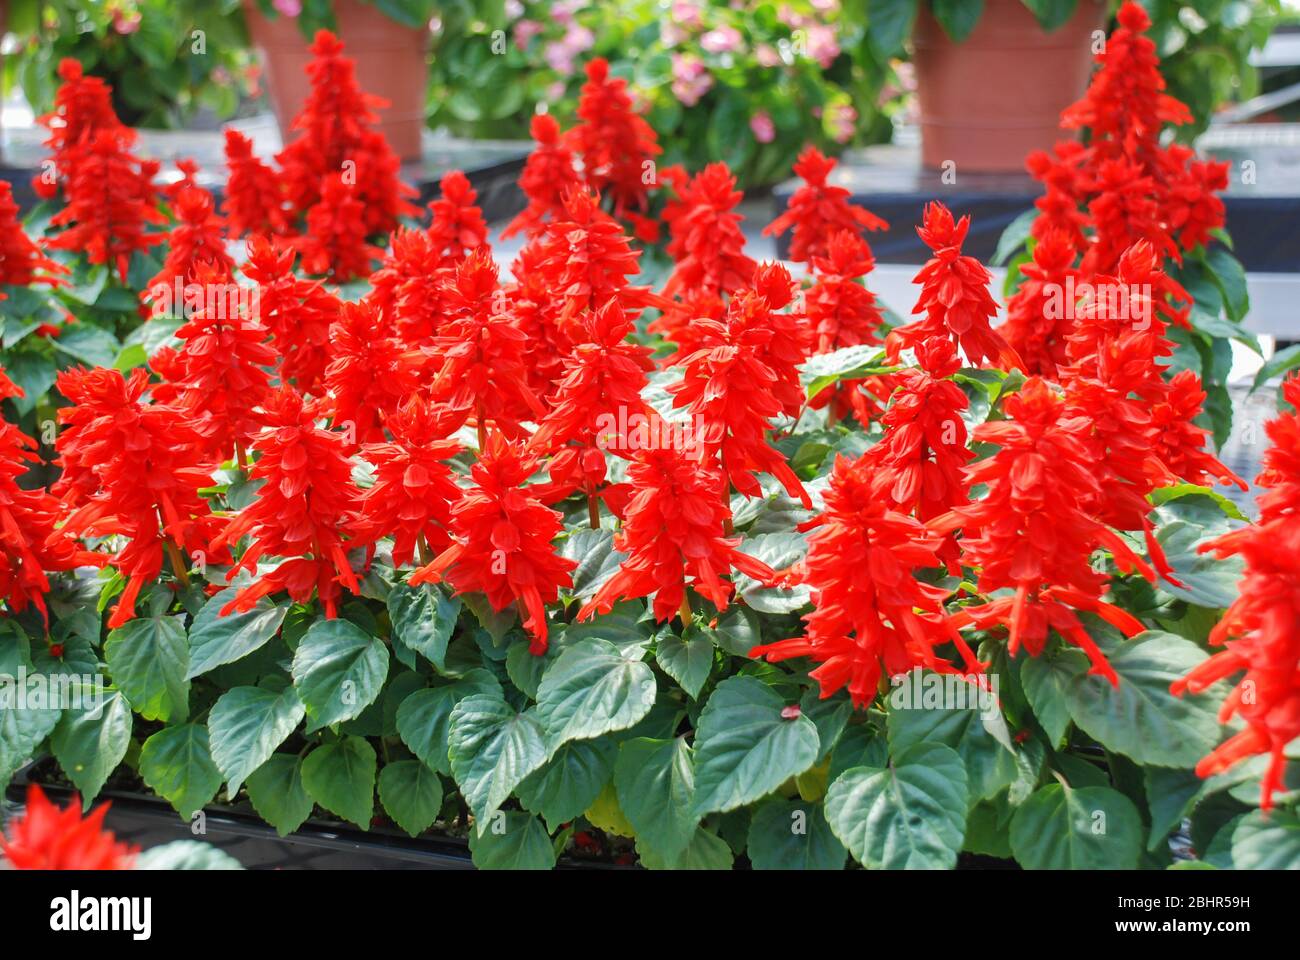 Red Salvia Splendens, Red flower pot plants in the black tray. Stock Photo